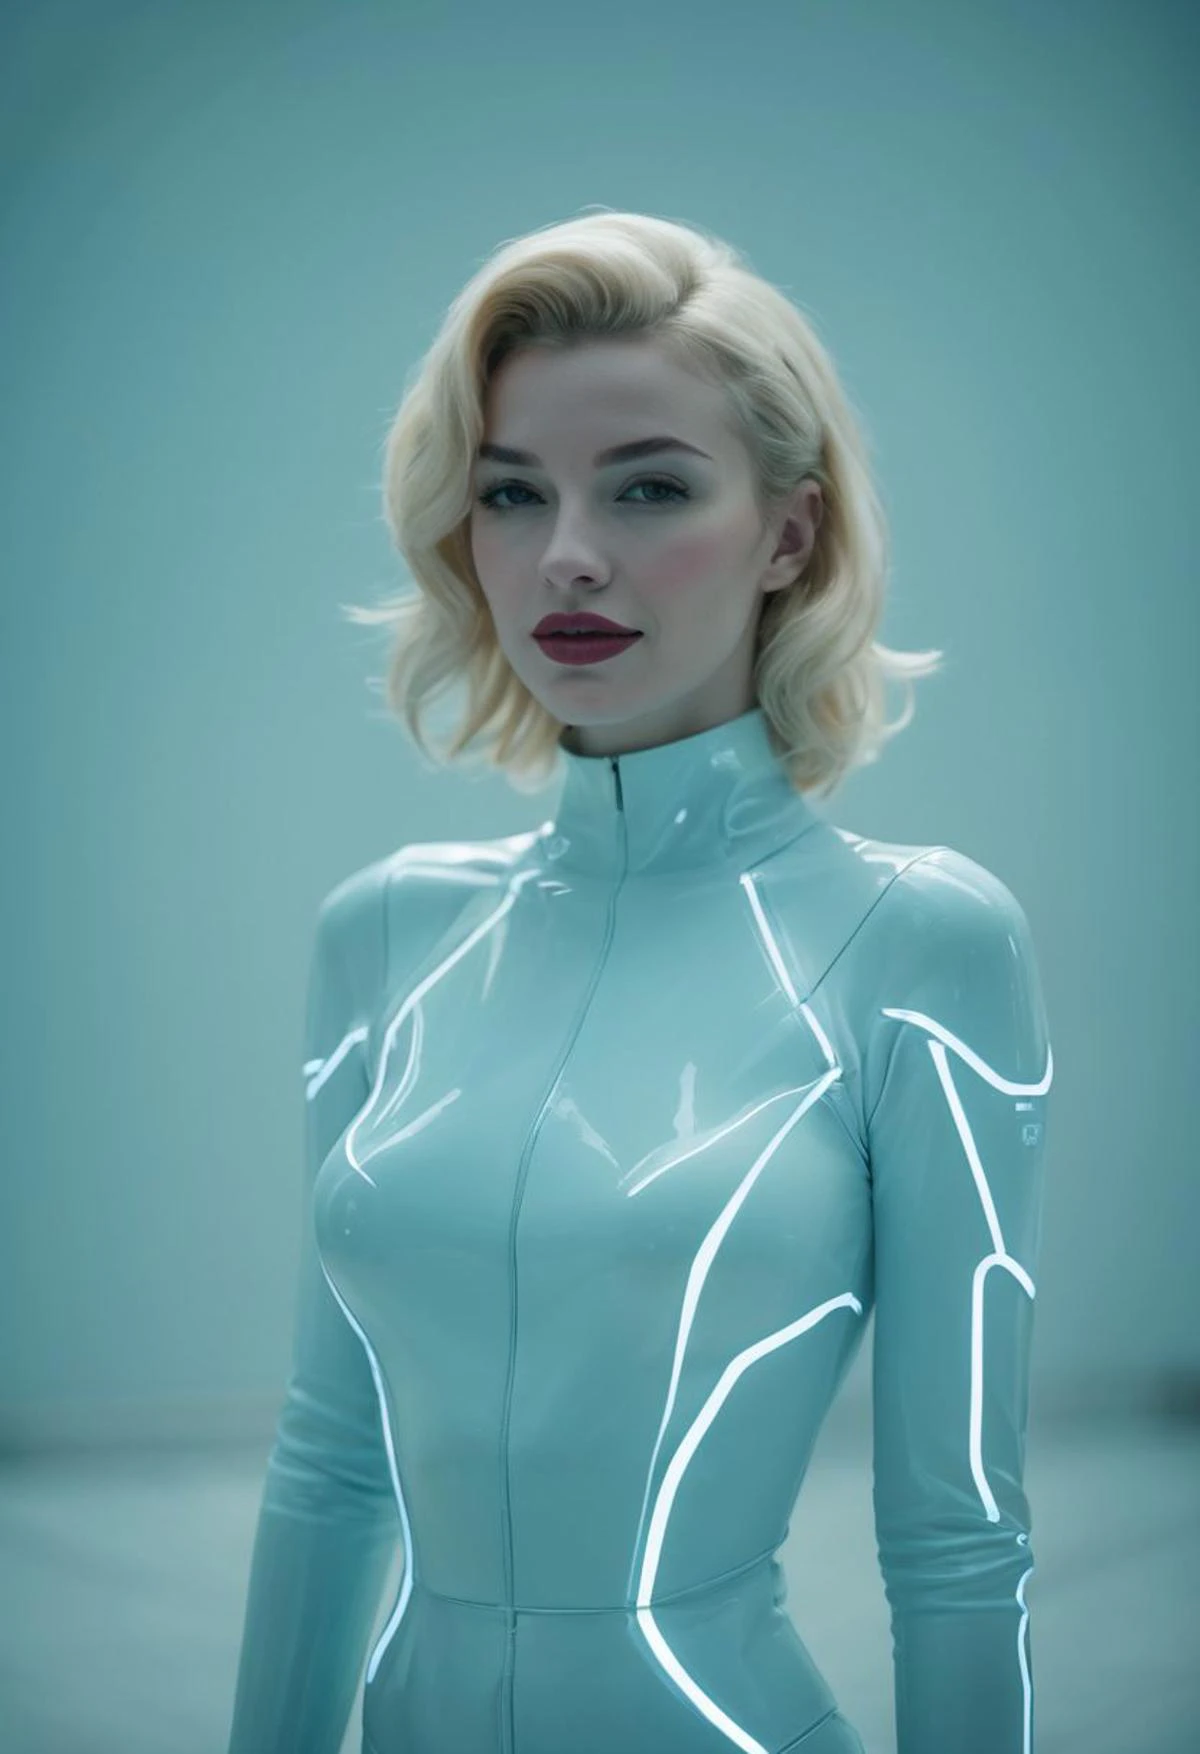 subtle grain, cinematic quality, modern art photograph, Marylin Monroe as a character from the movie Tron, in the style of Tron, fine art photography, shot on Canon EOS 5D Mark III